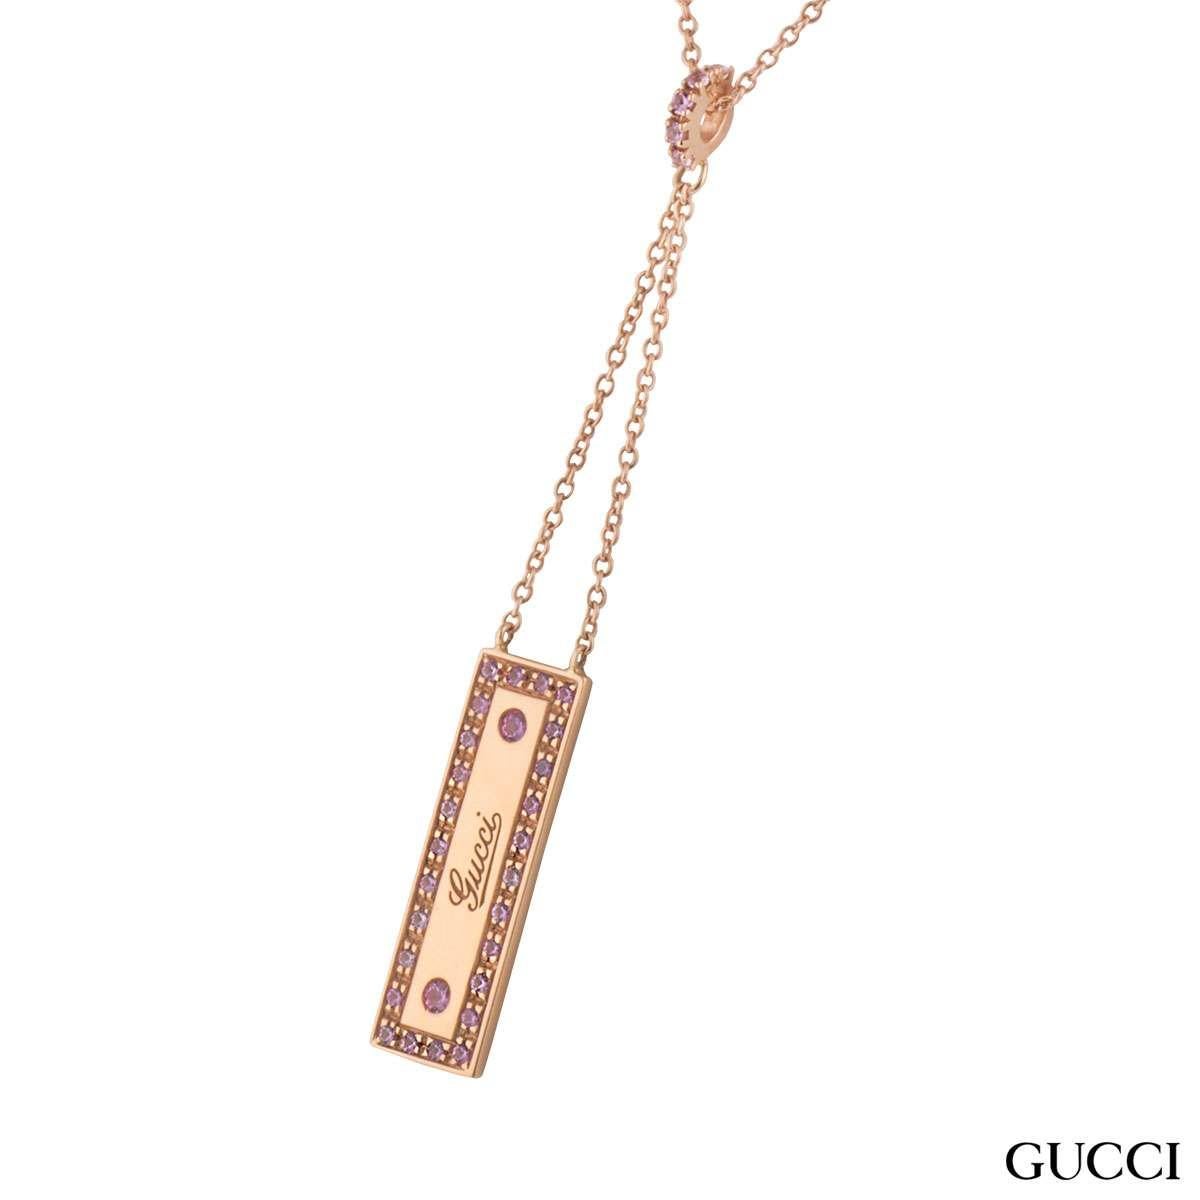 A beautiful 18k rose gold spinel Gucci pendant. The pendant comprises of a rectangle motif with 'Gucci' logo embossed in the centre. The logo has a box around set with pink spinel gemstones with a weight of approximately 0.25ct, with a pink hue